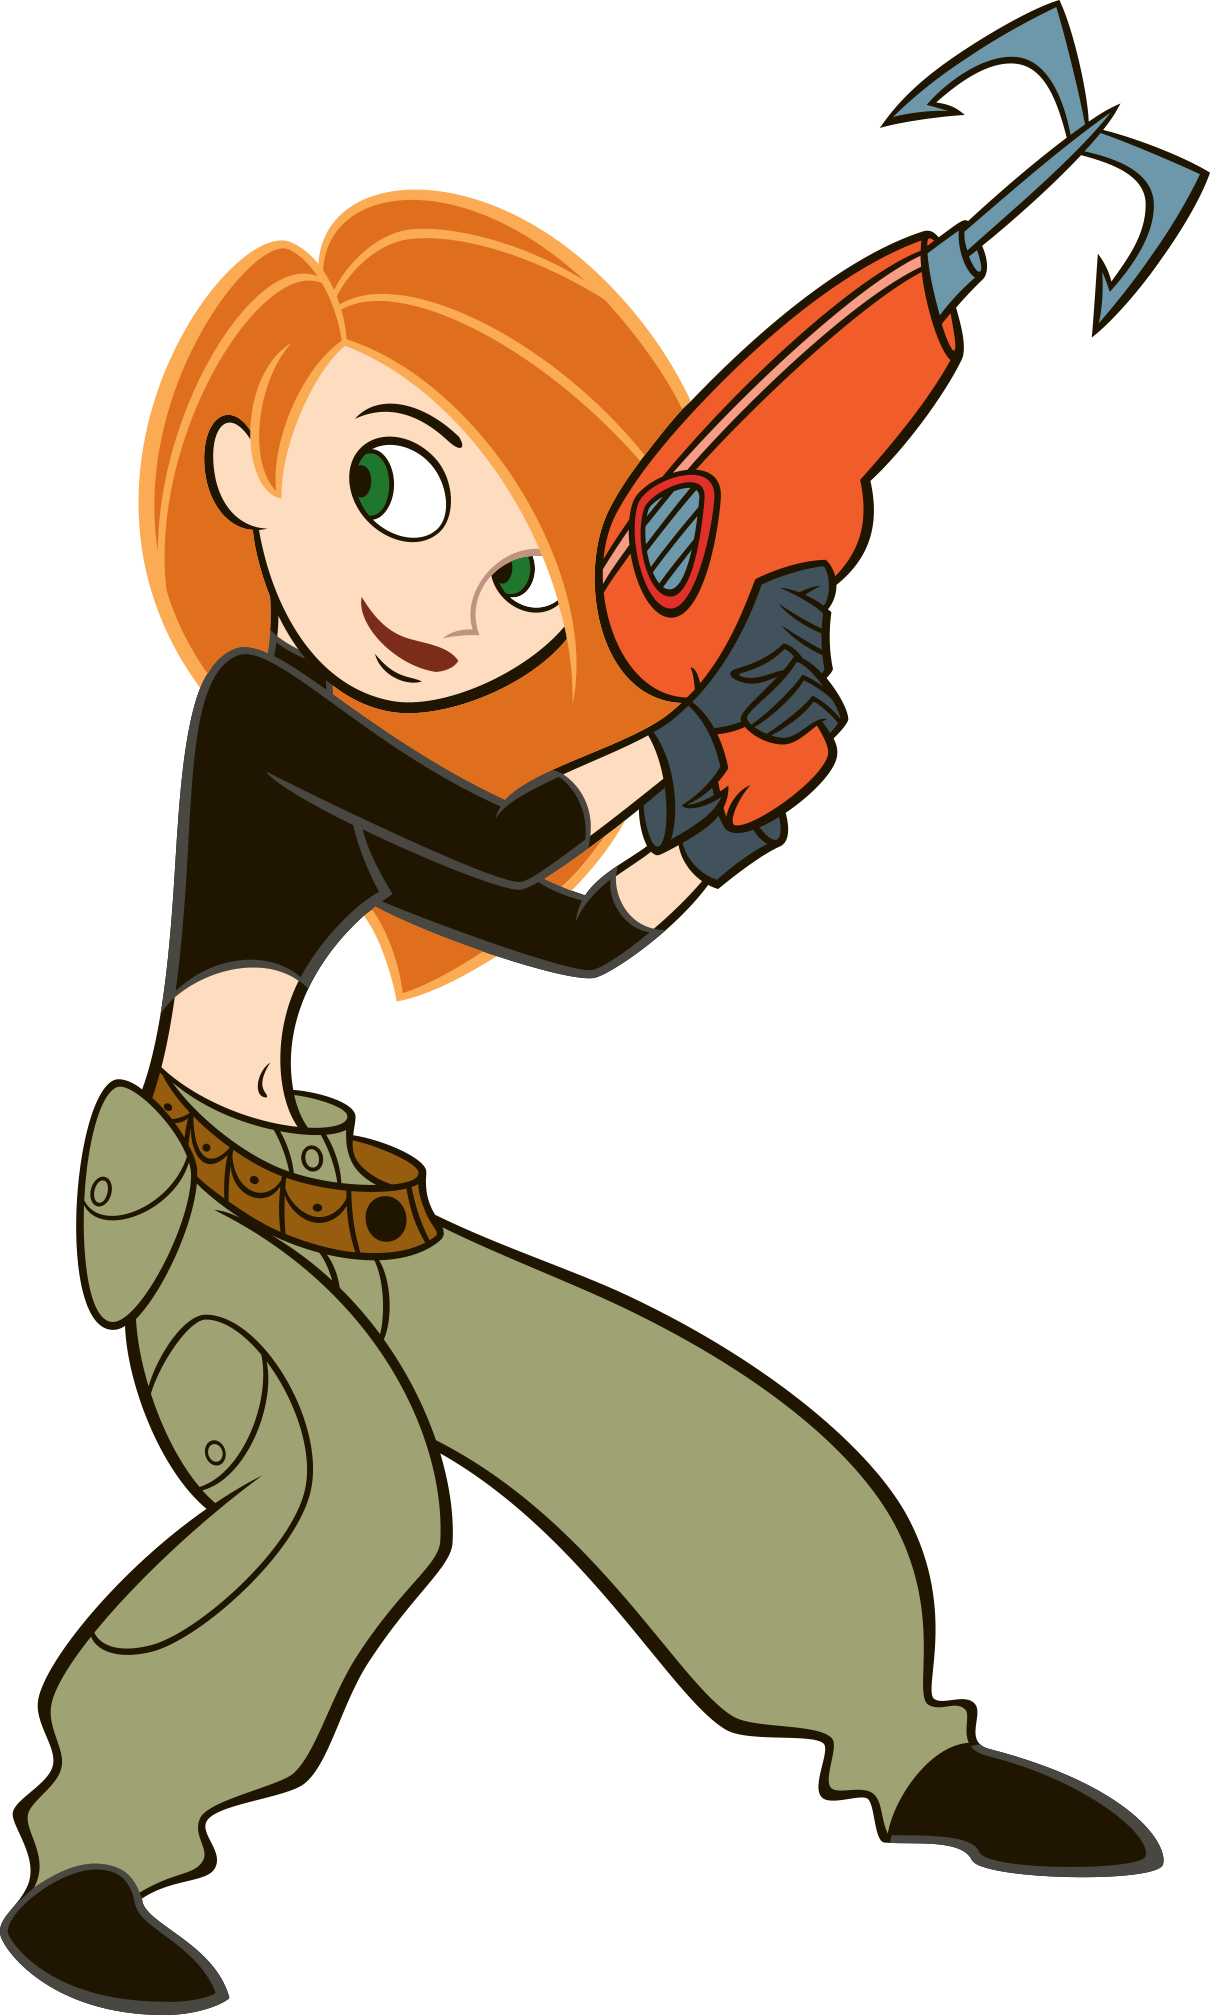 The First Kim Possible Movie Photo Is Here & It Will 